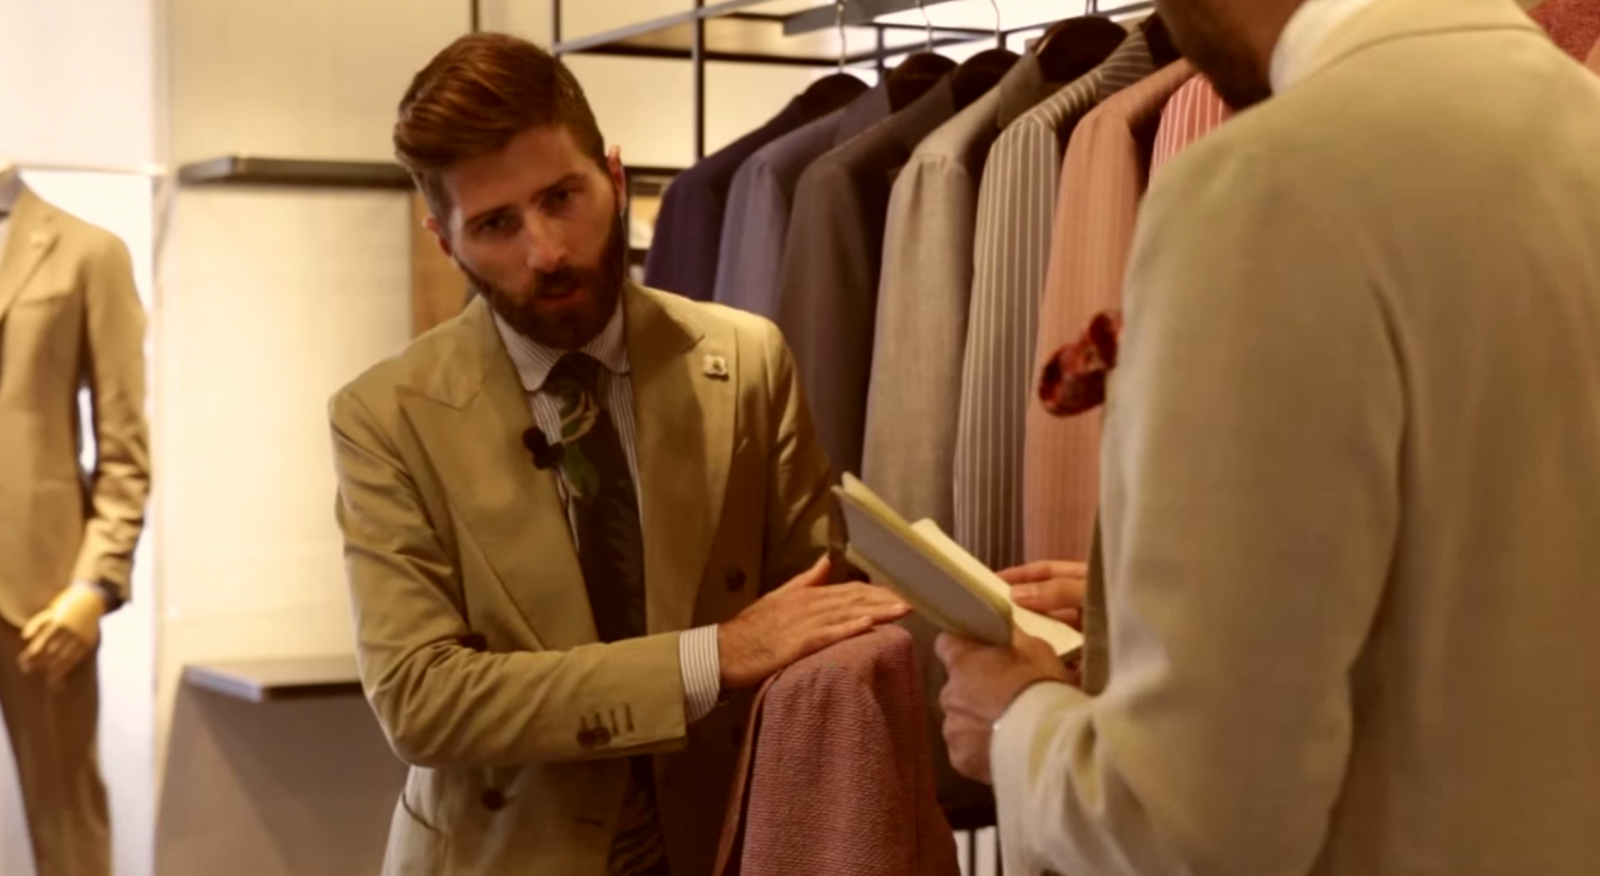 Video Interview to Alessio Lardini World-renowned jackets and more